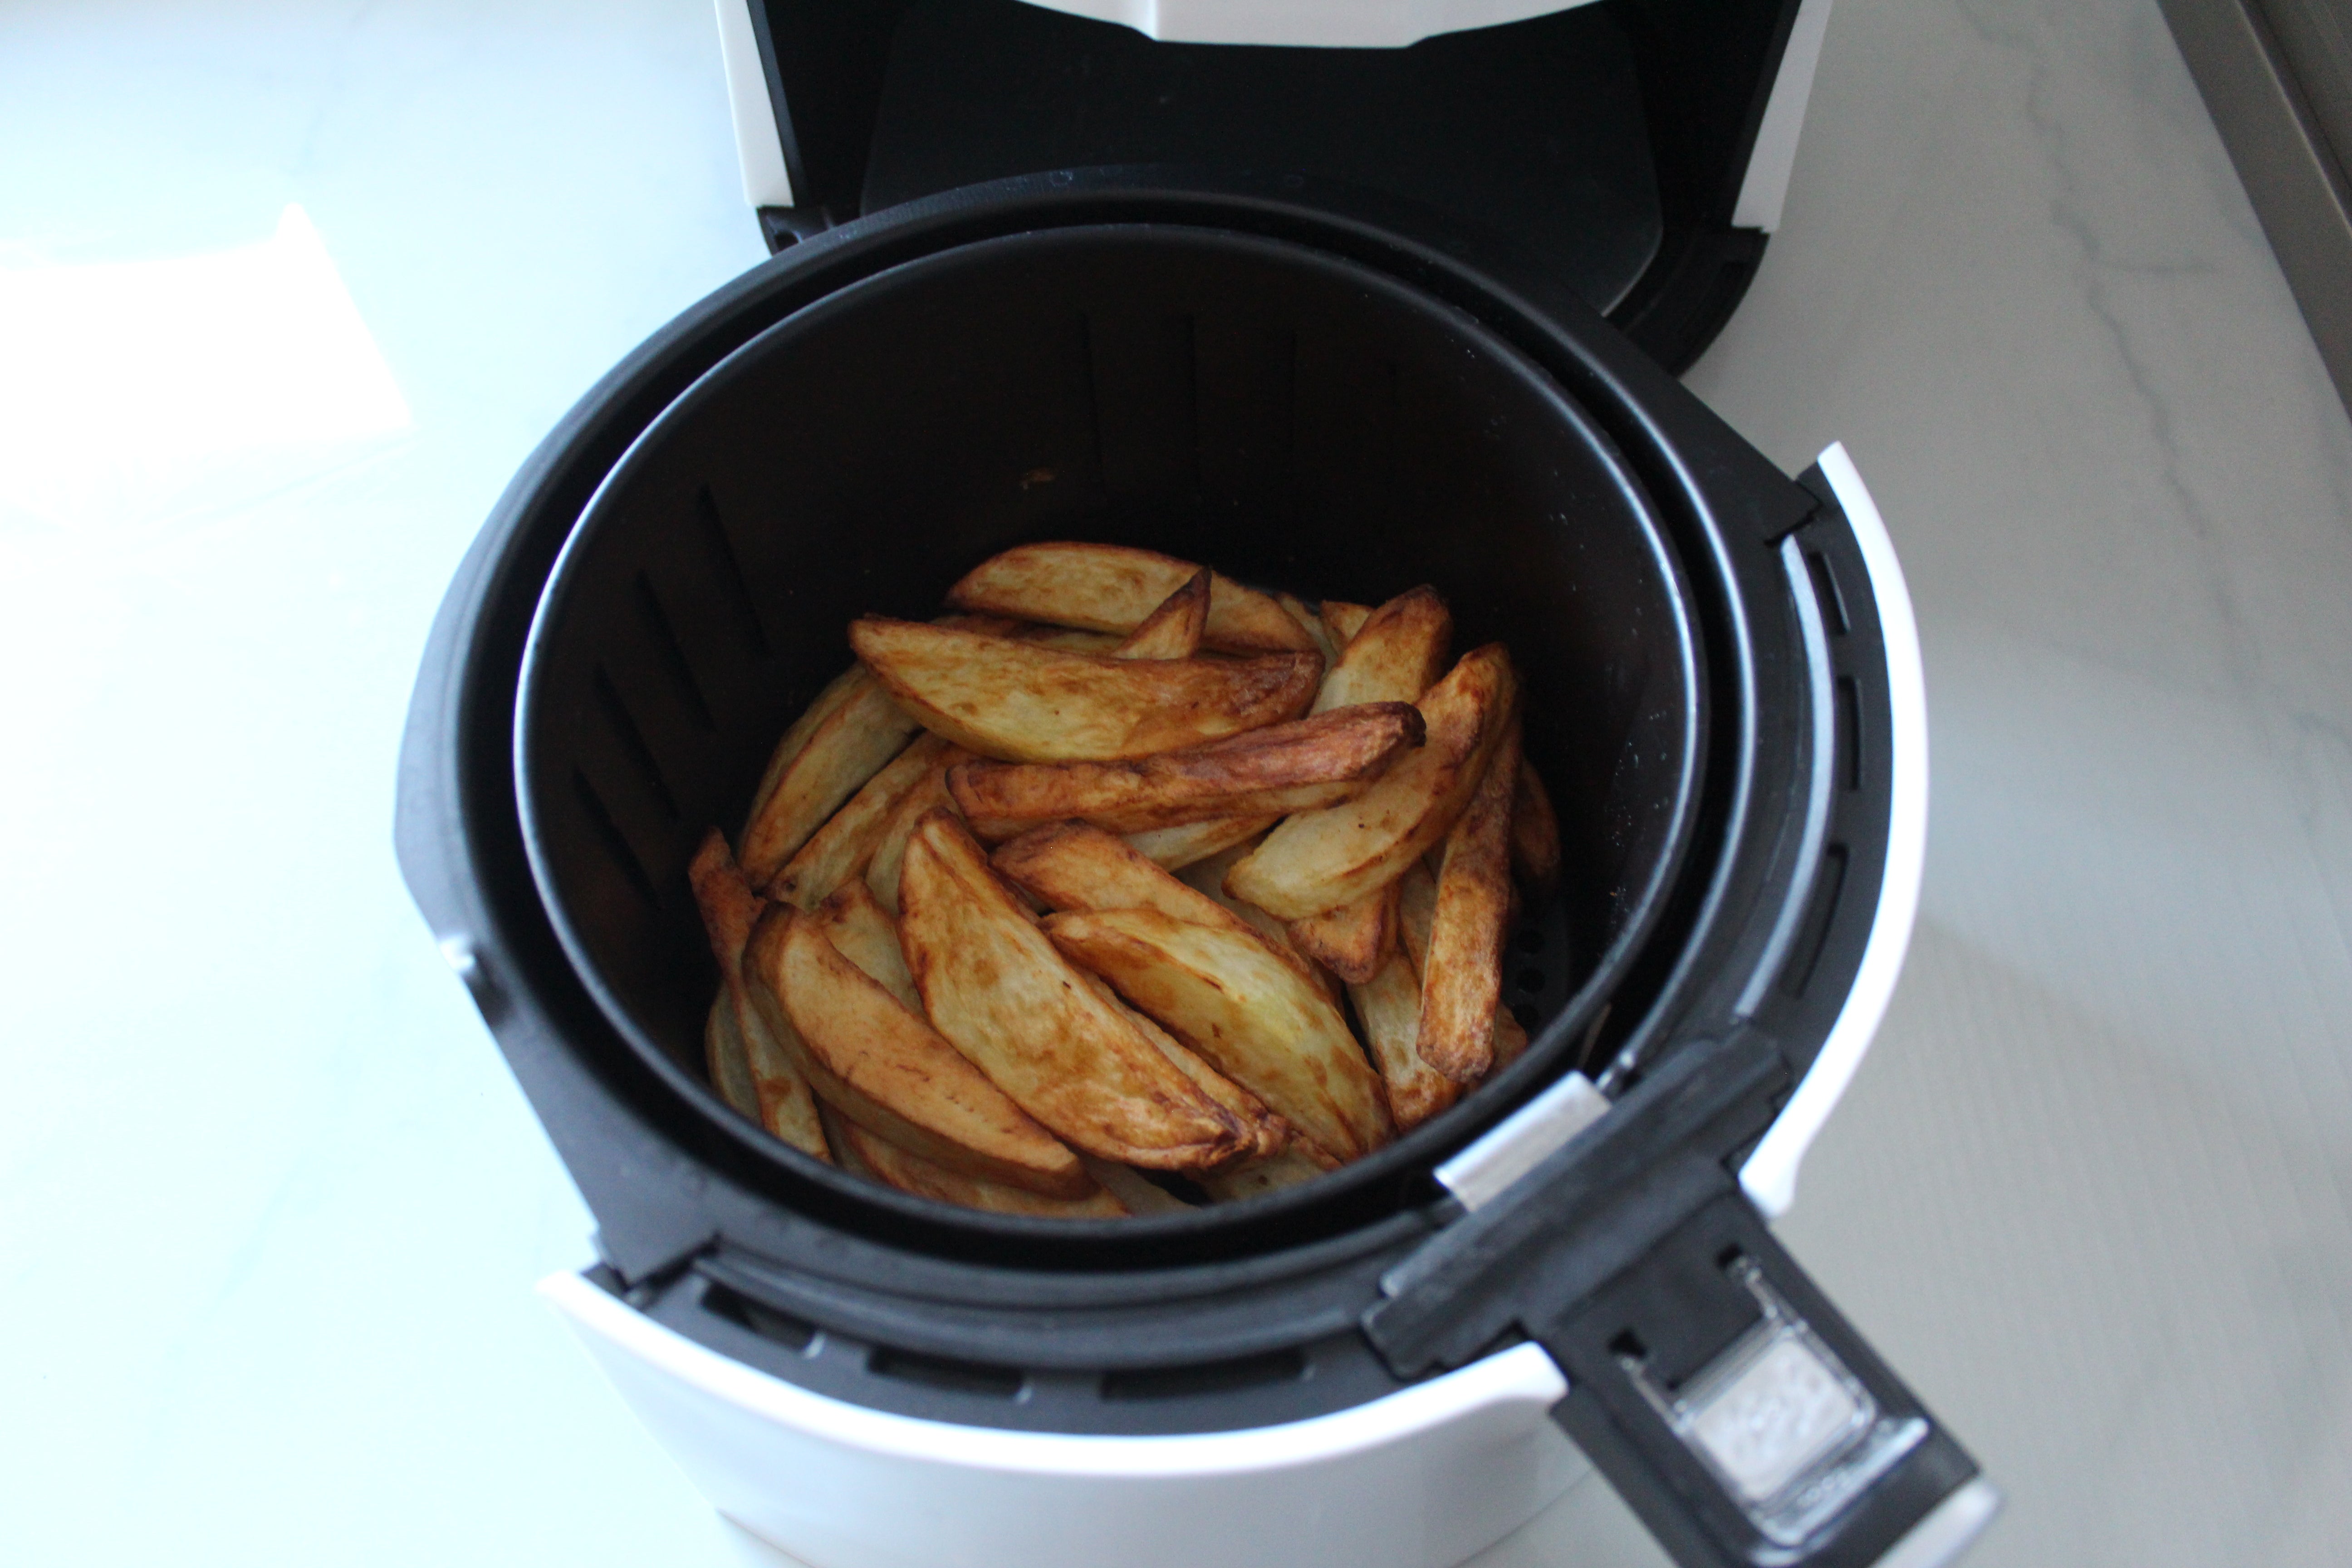 Best air fryer 2022: Top choices for healthier frying